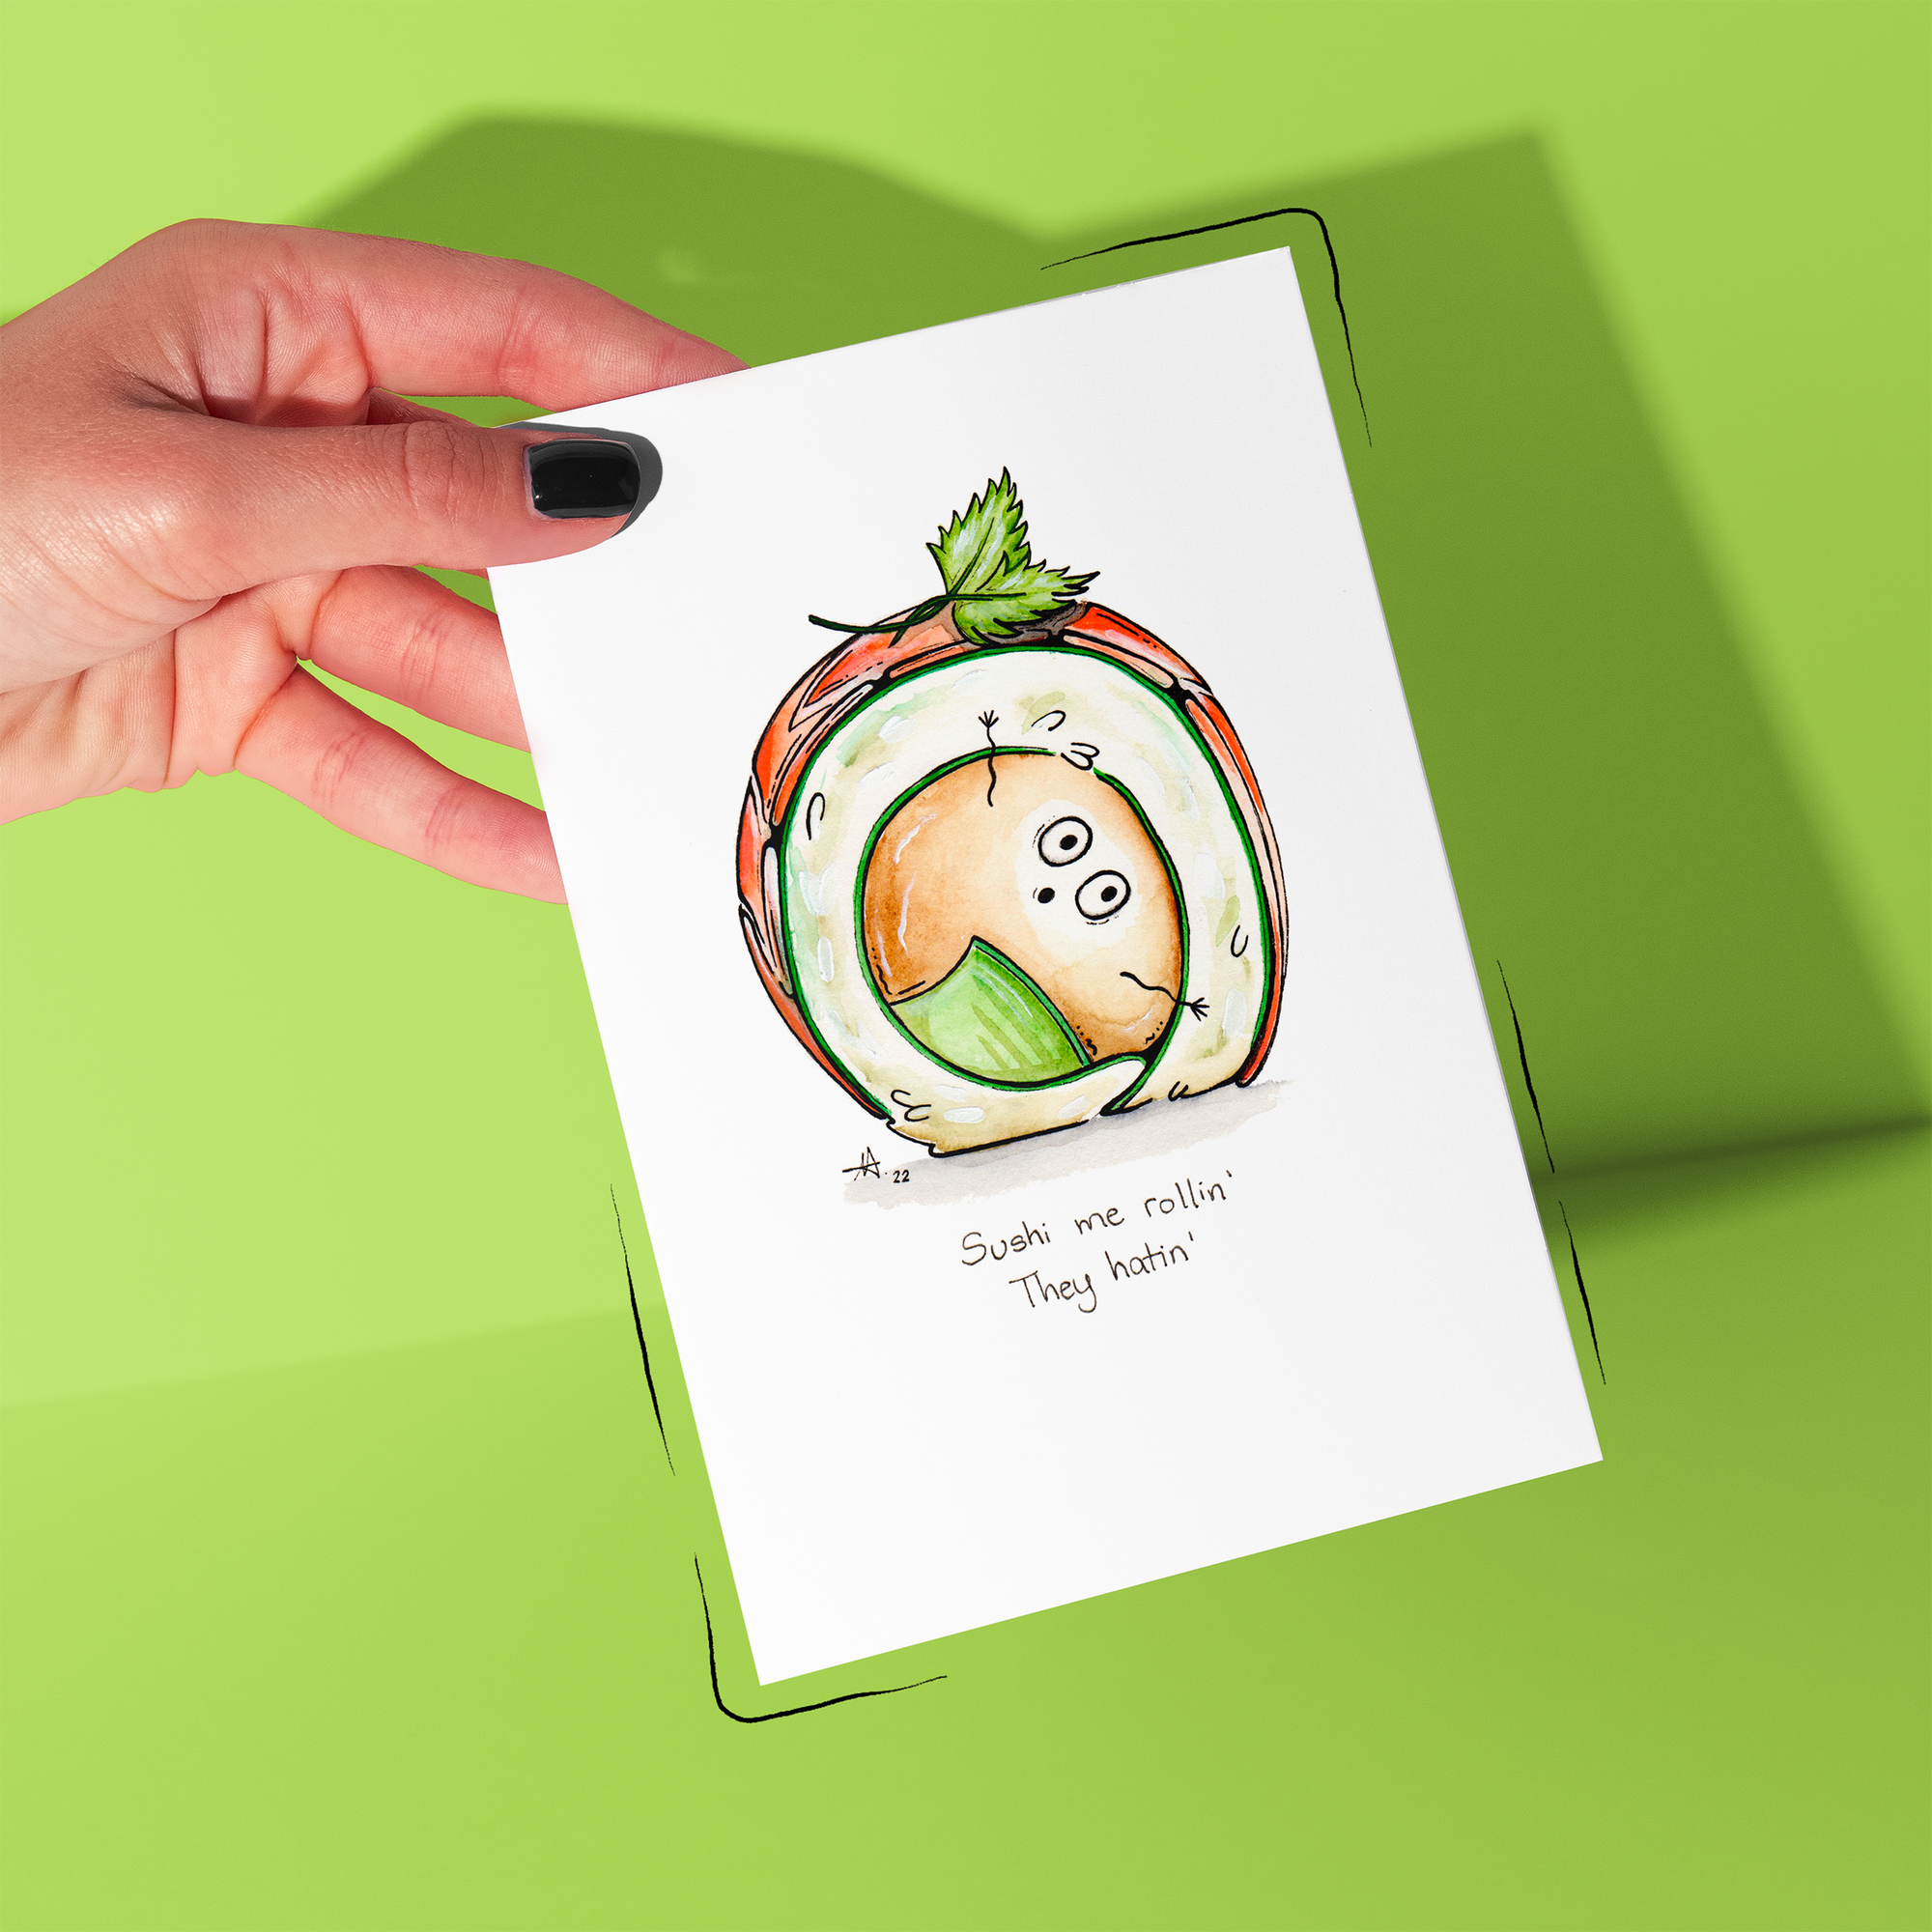 "Sushi me rollin. They hatin." - Greeting Card / Small Print